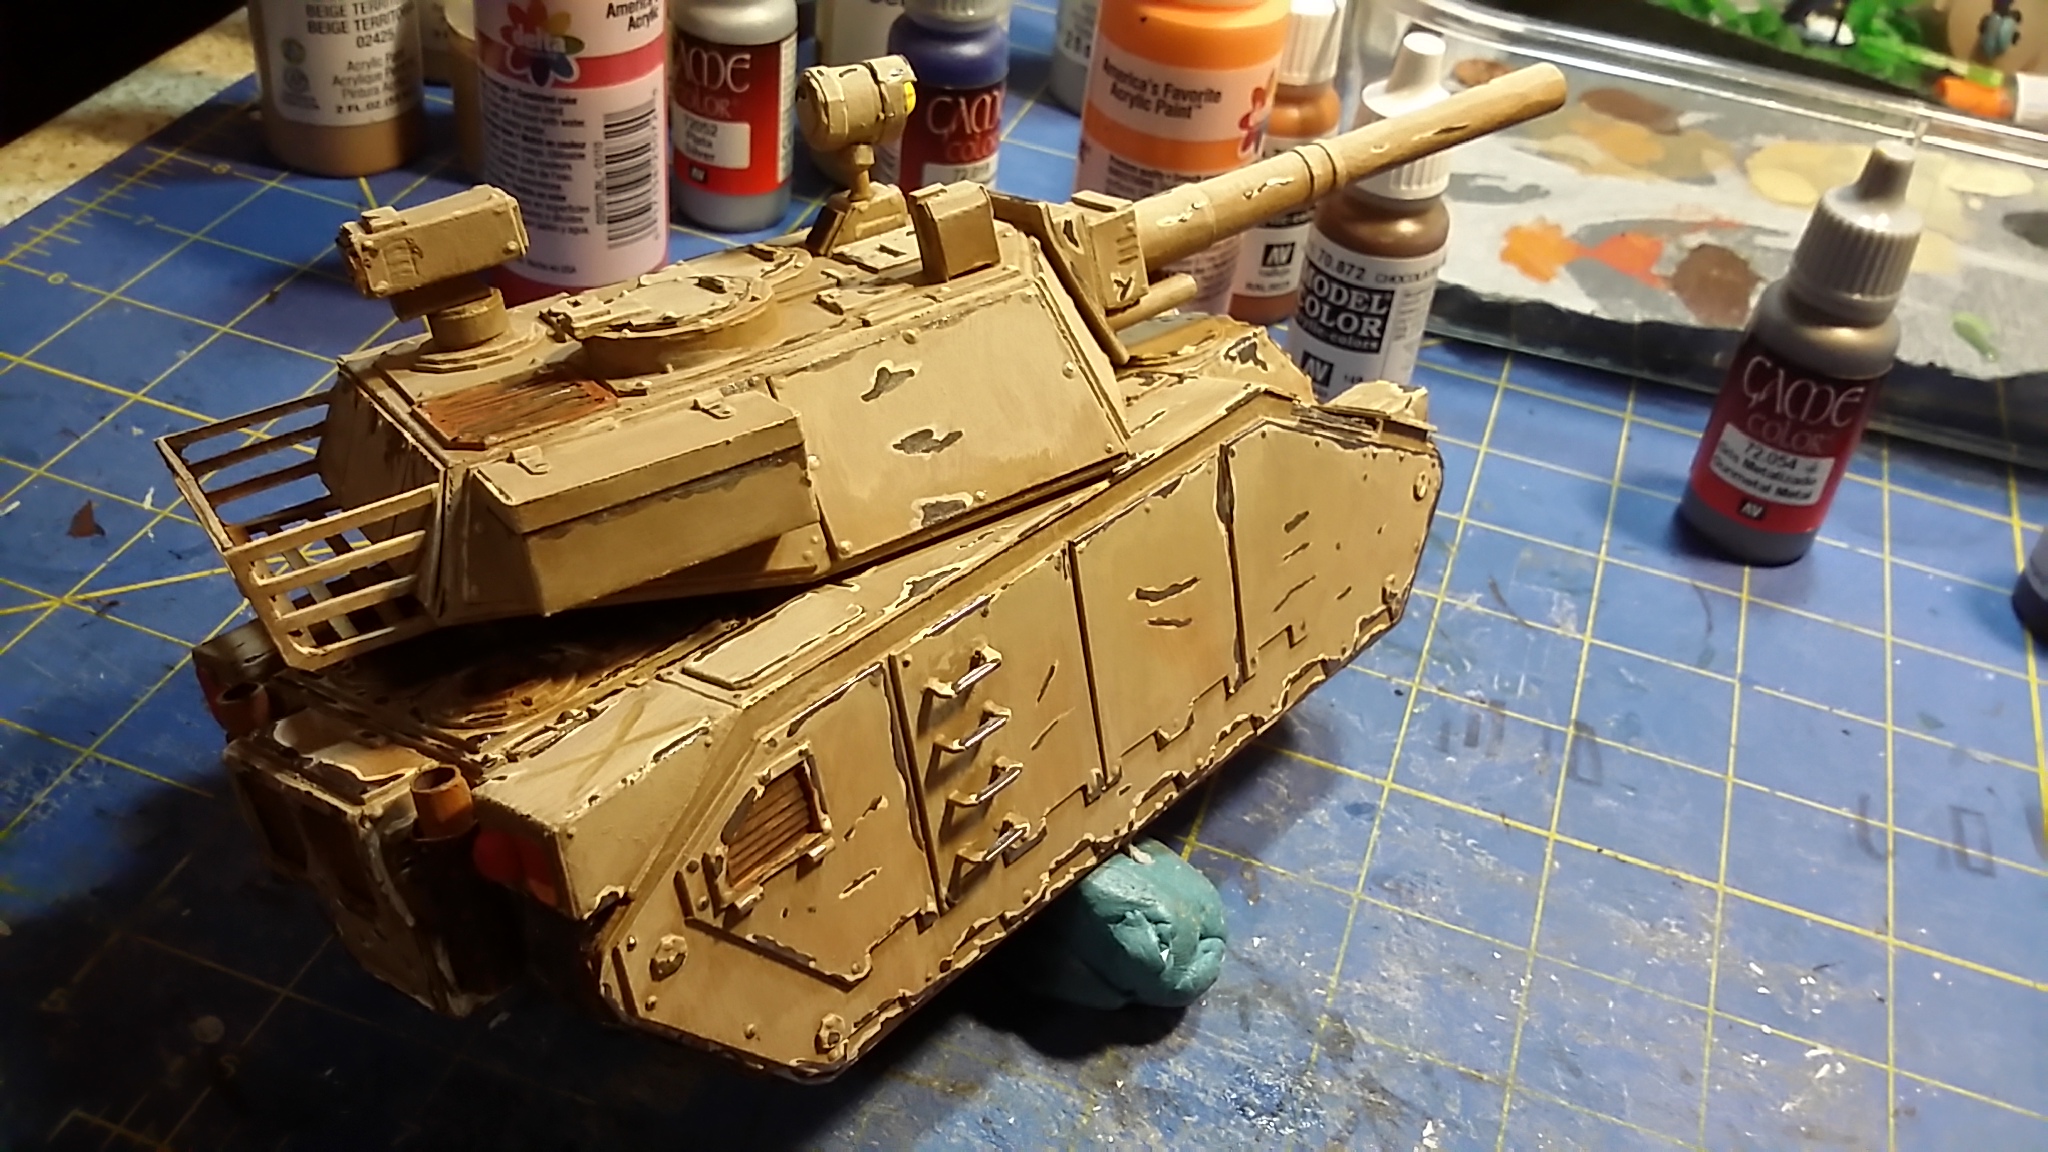 Abrams Inspired MBT, right side